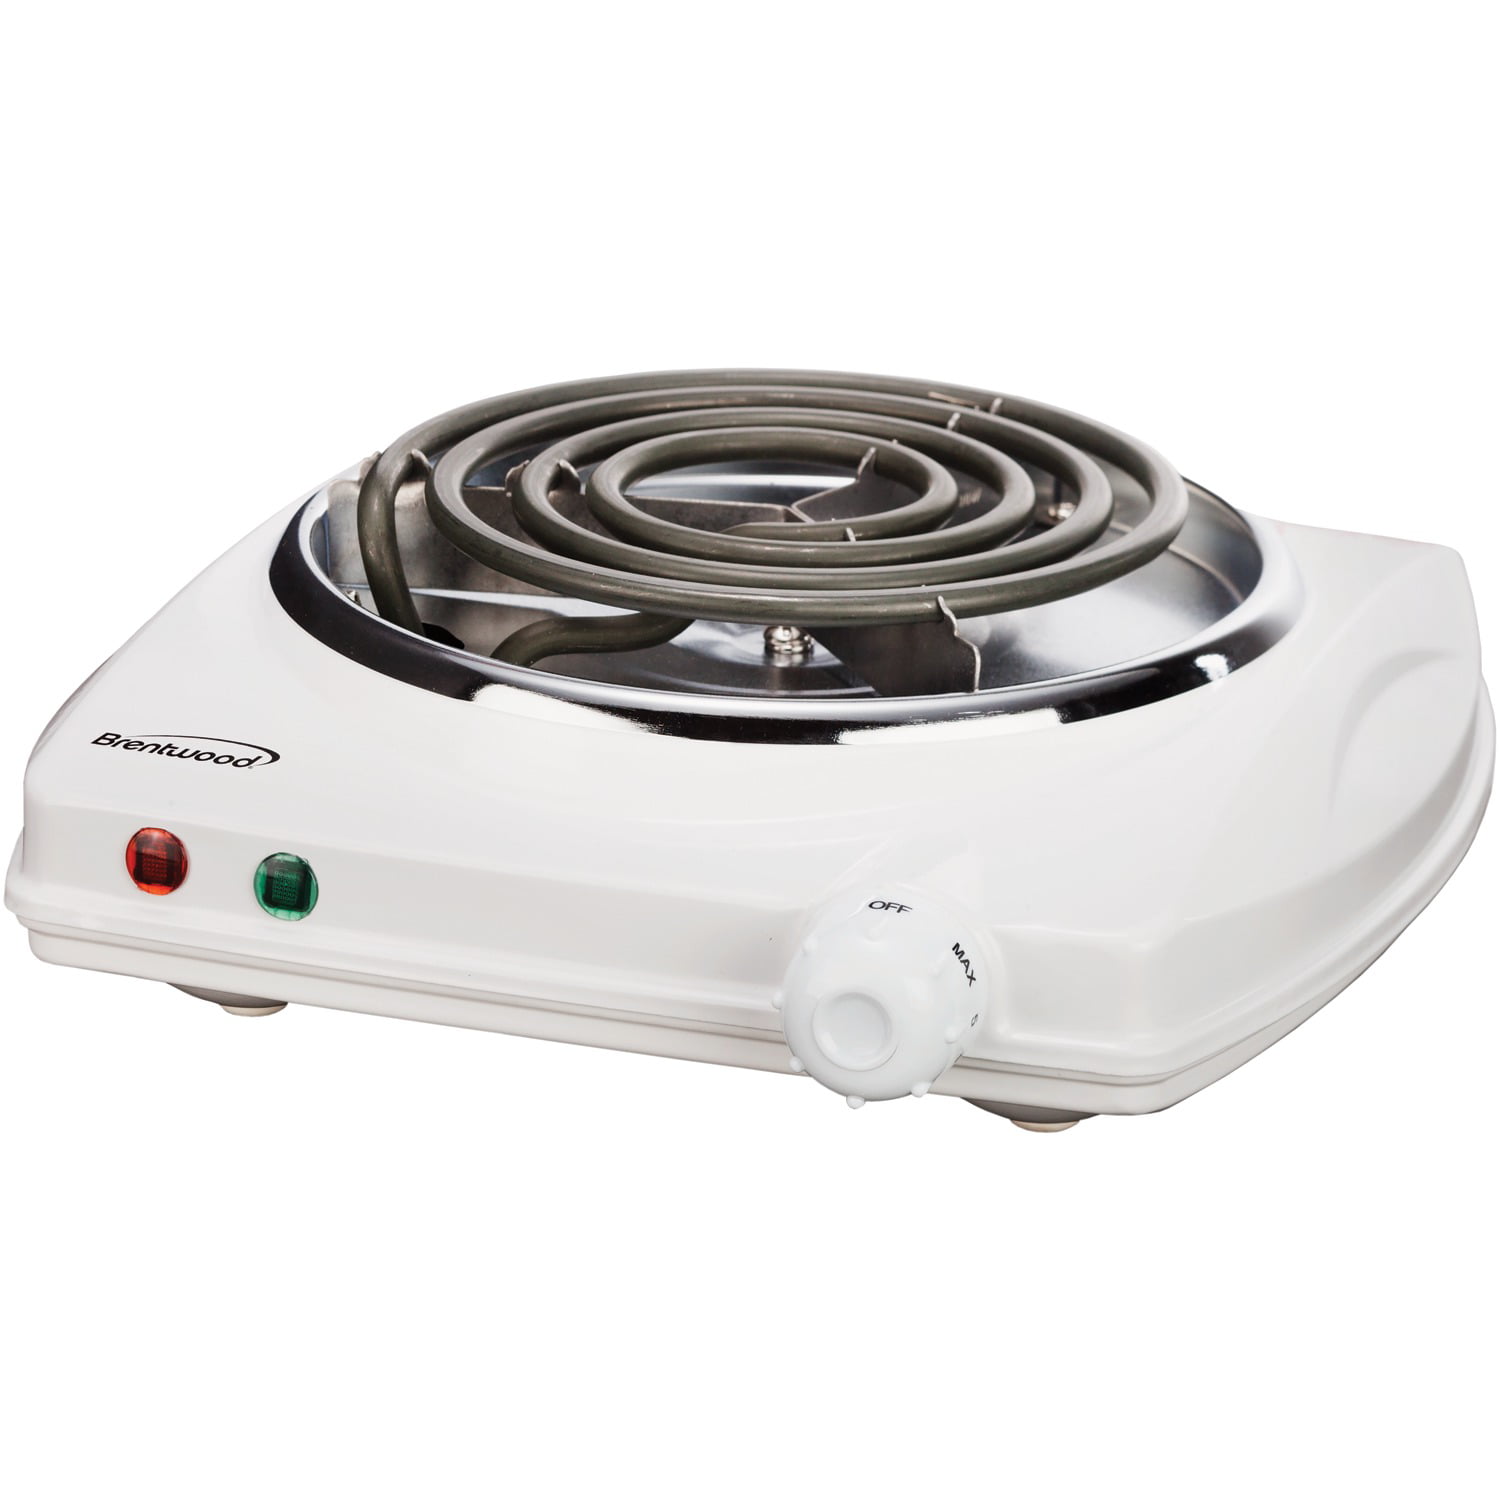 Brentwood Compact 1000 Watt Single Electric Cooking Stove Burner White Small  NEW, 1 unit - Kroger